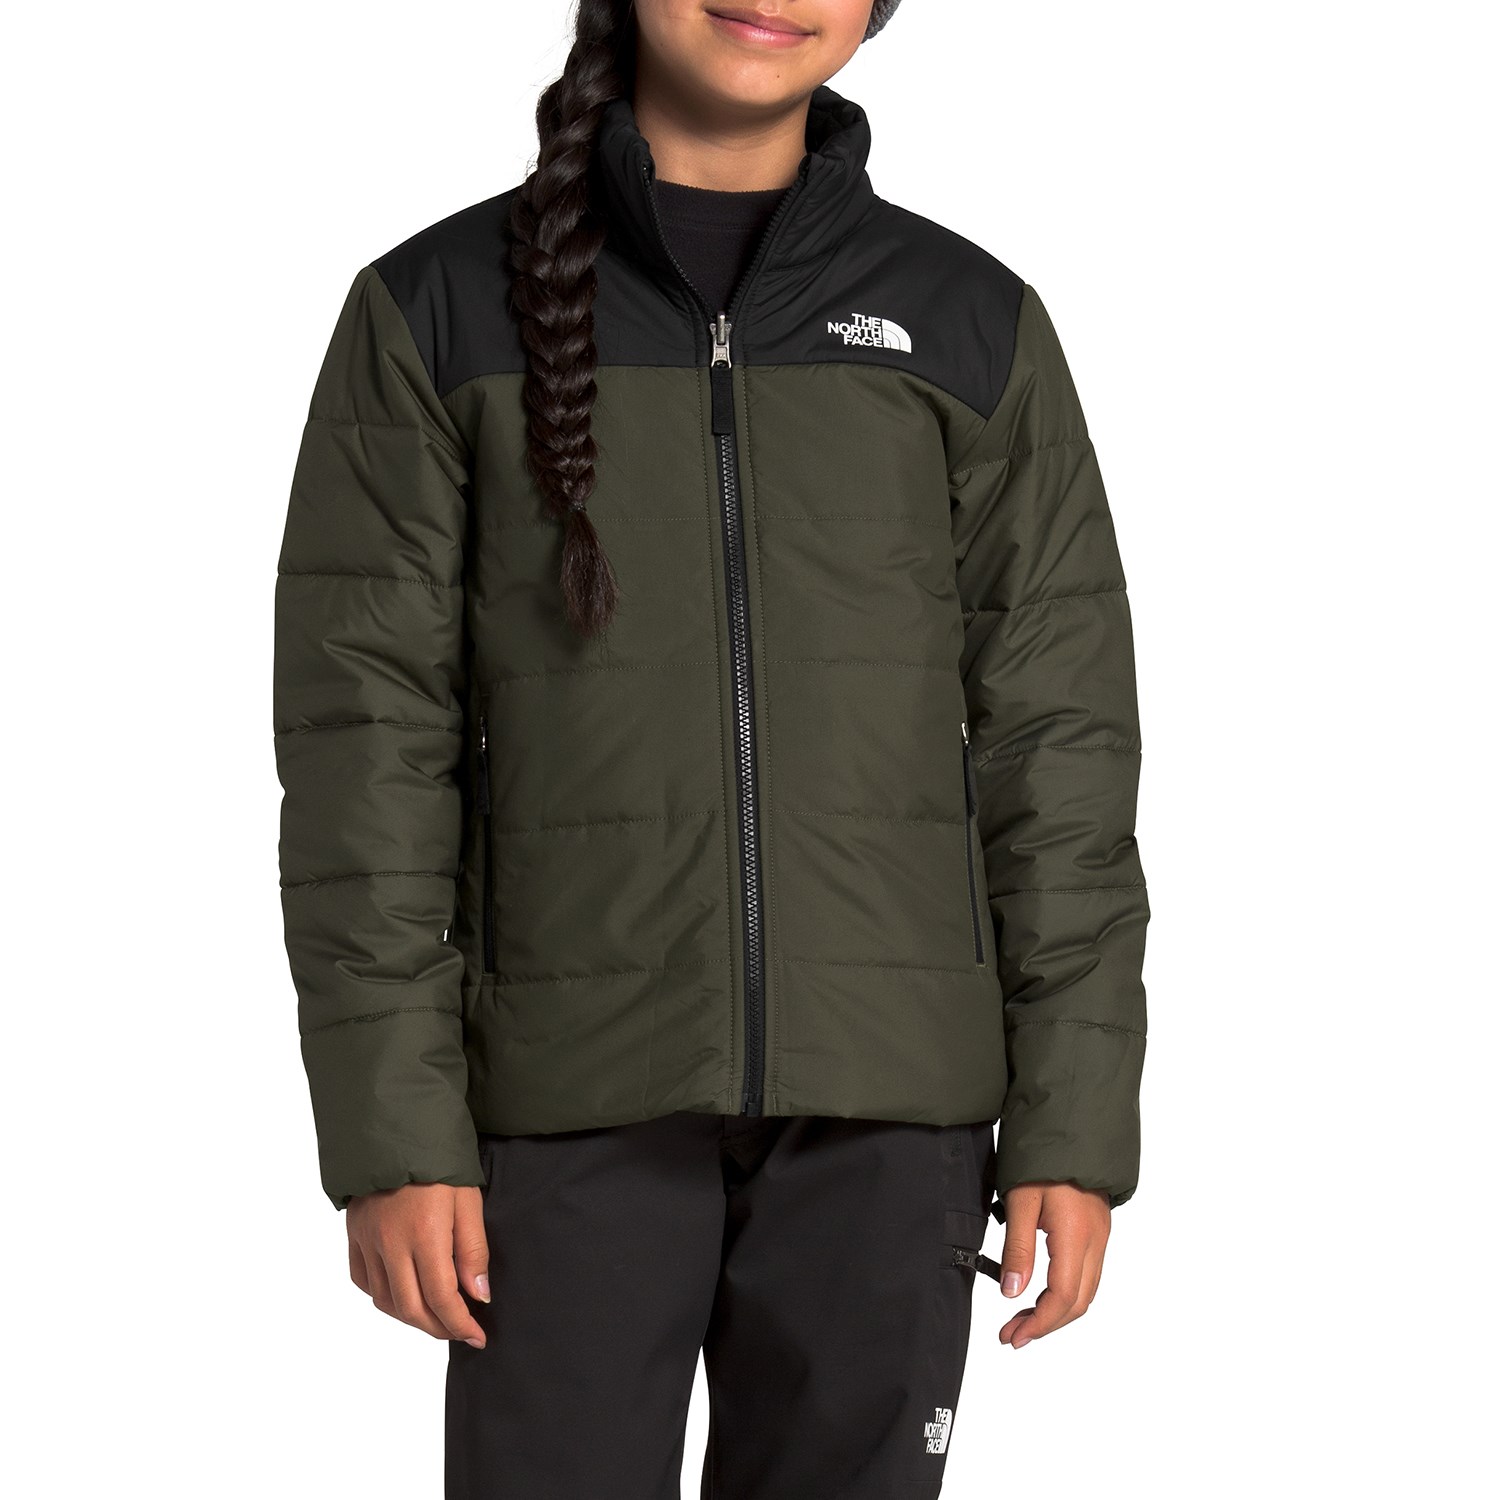 north face jackets for toddlers on sale